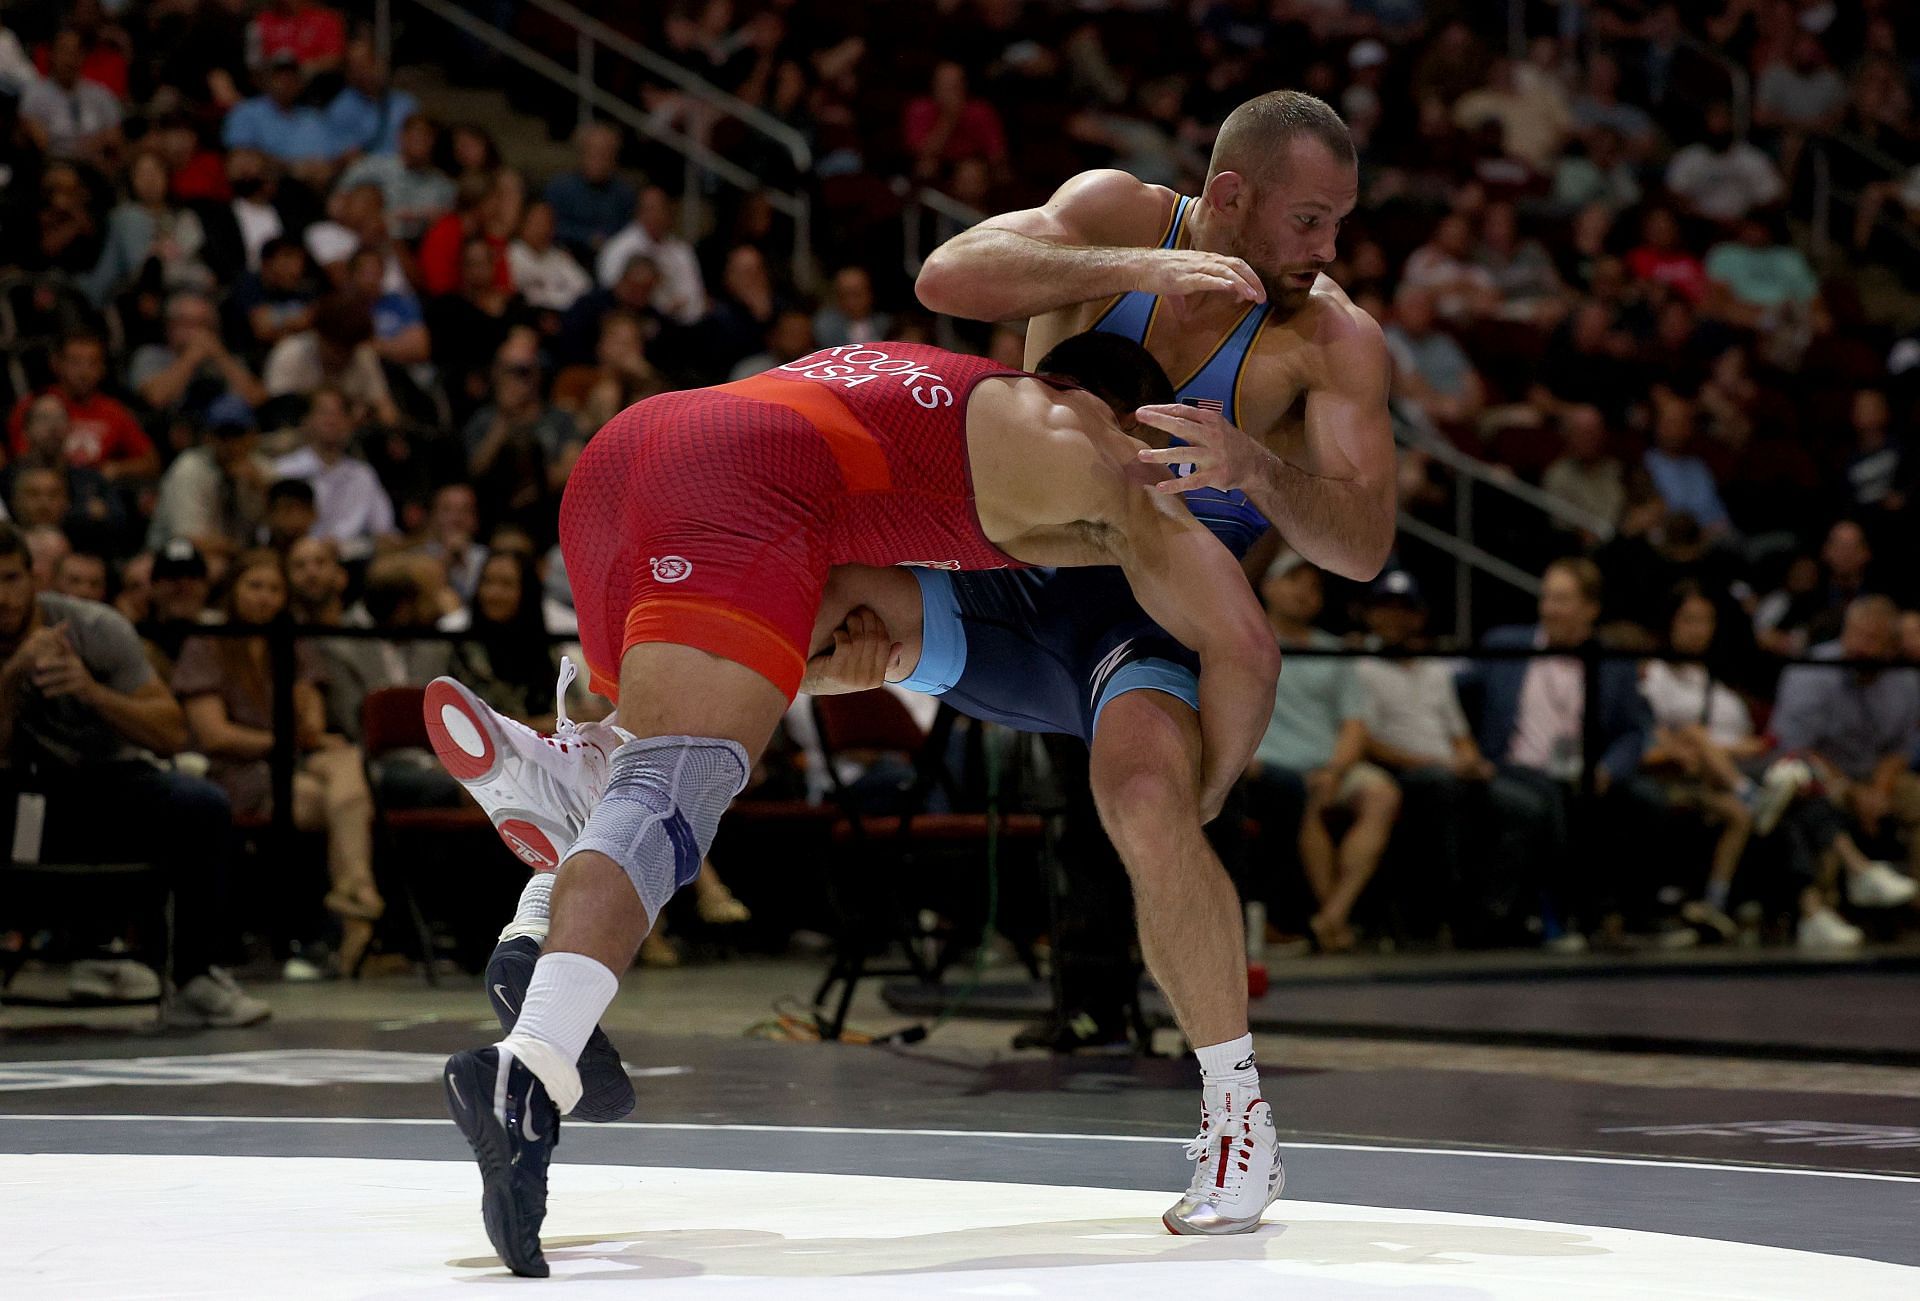 Aaron Brooks and David Taylor compete in the men&#039;s freestyle 86 kg match during the 2023 Beat the Streets Final X Wrestling event at the Prudential Center on June 10, 2023 in Newark, New Jersey. (Photo by Elsa/Getty Images)